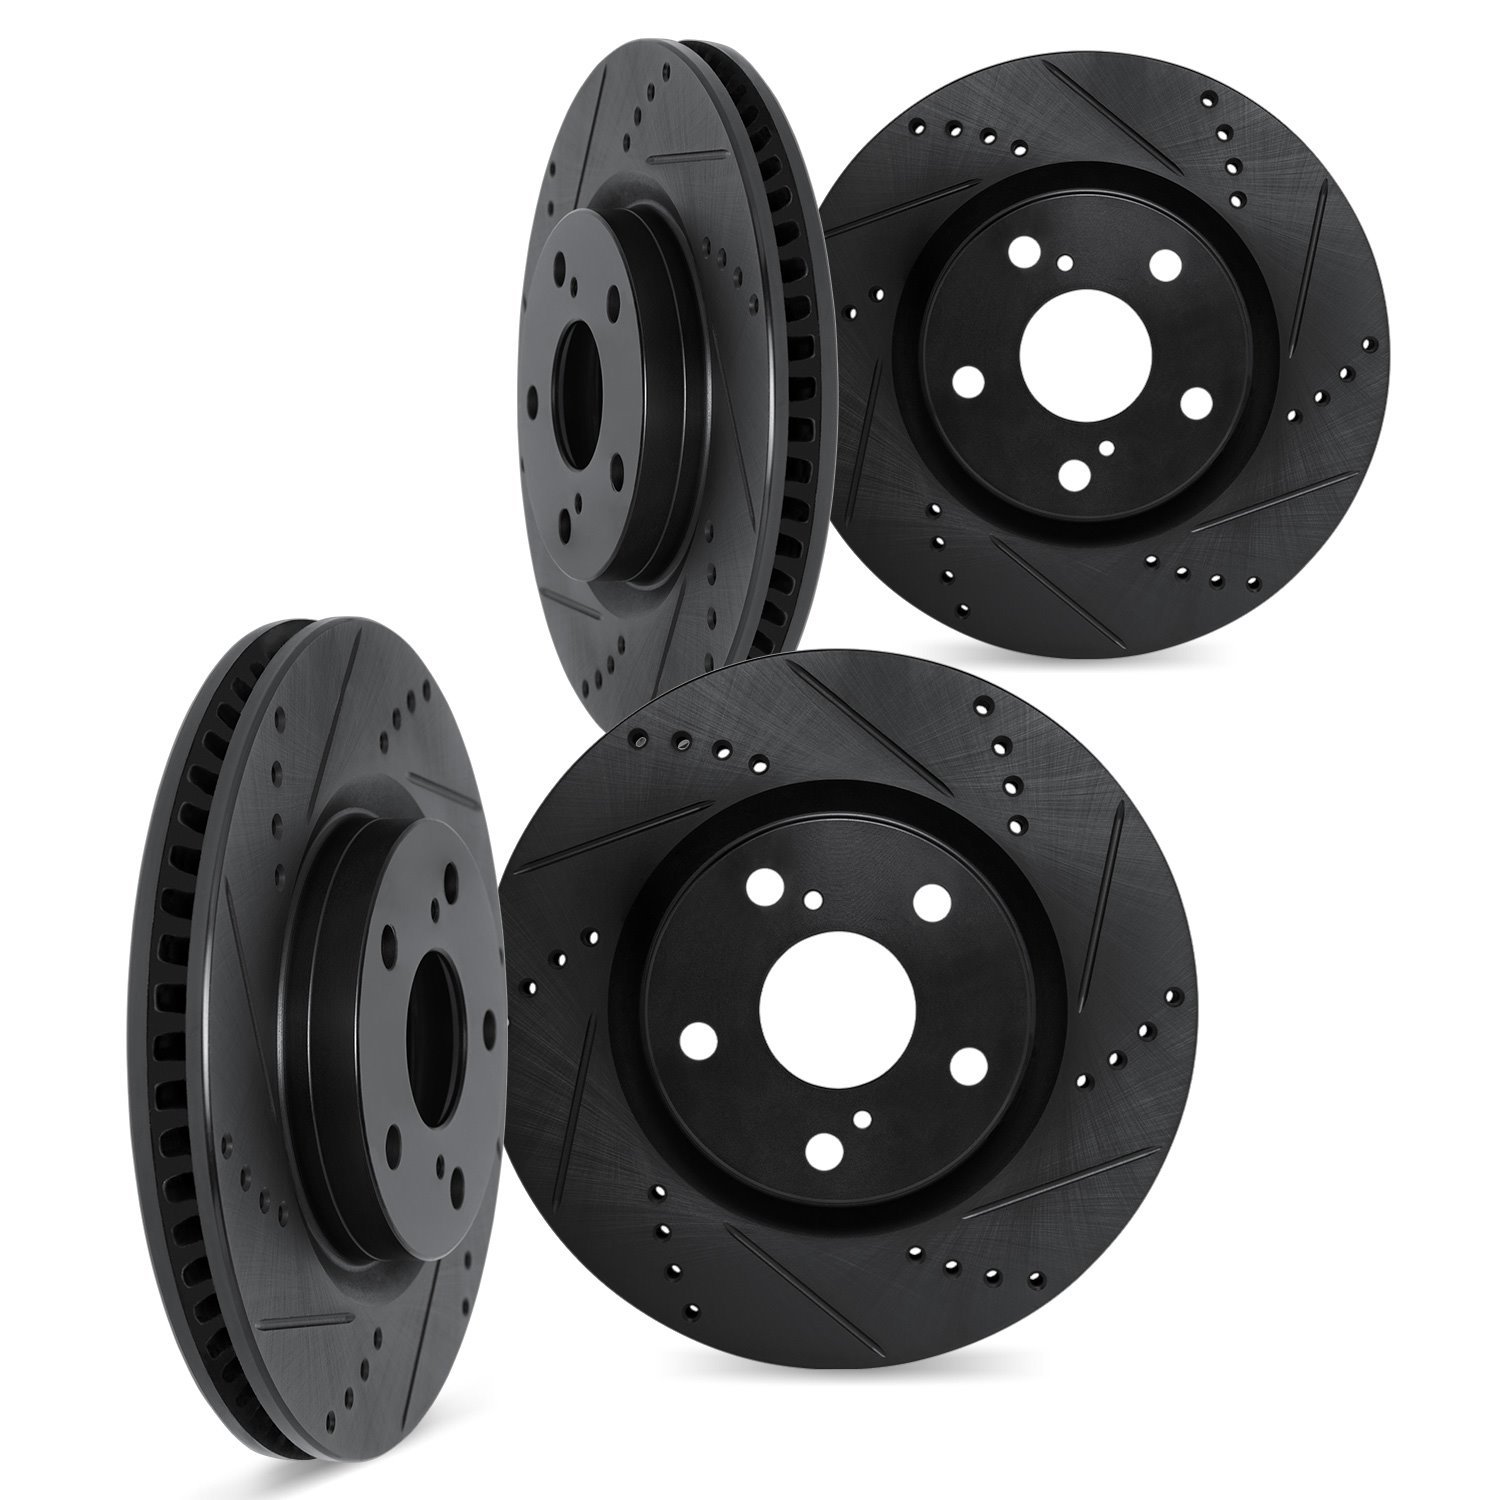 8004-31058 Drilled/Slotted Brake Rotors [Black], Fits Select BMW, Position: Front and Rear